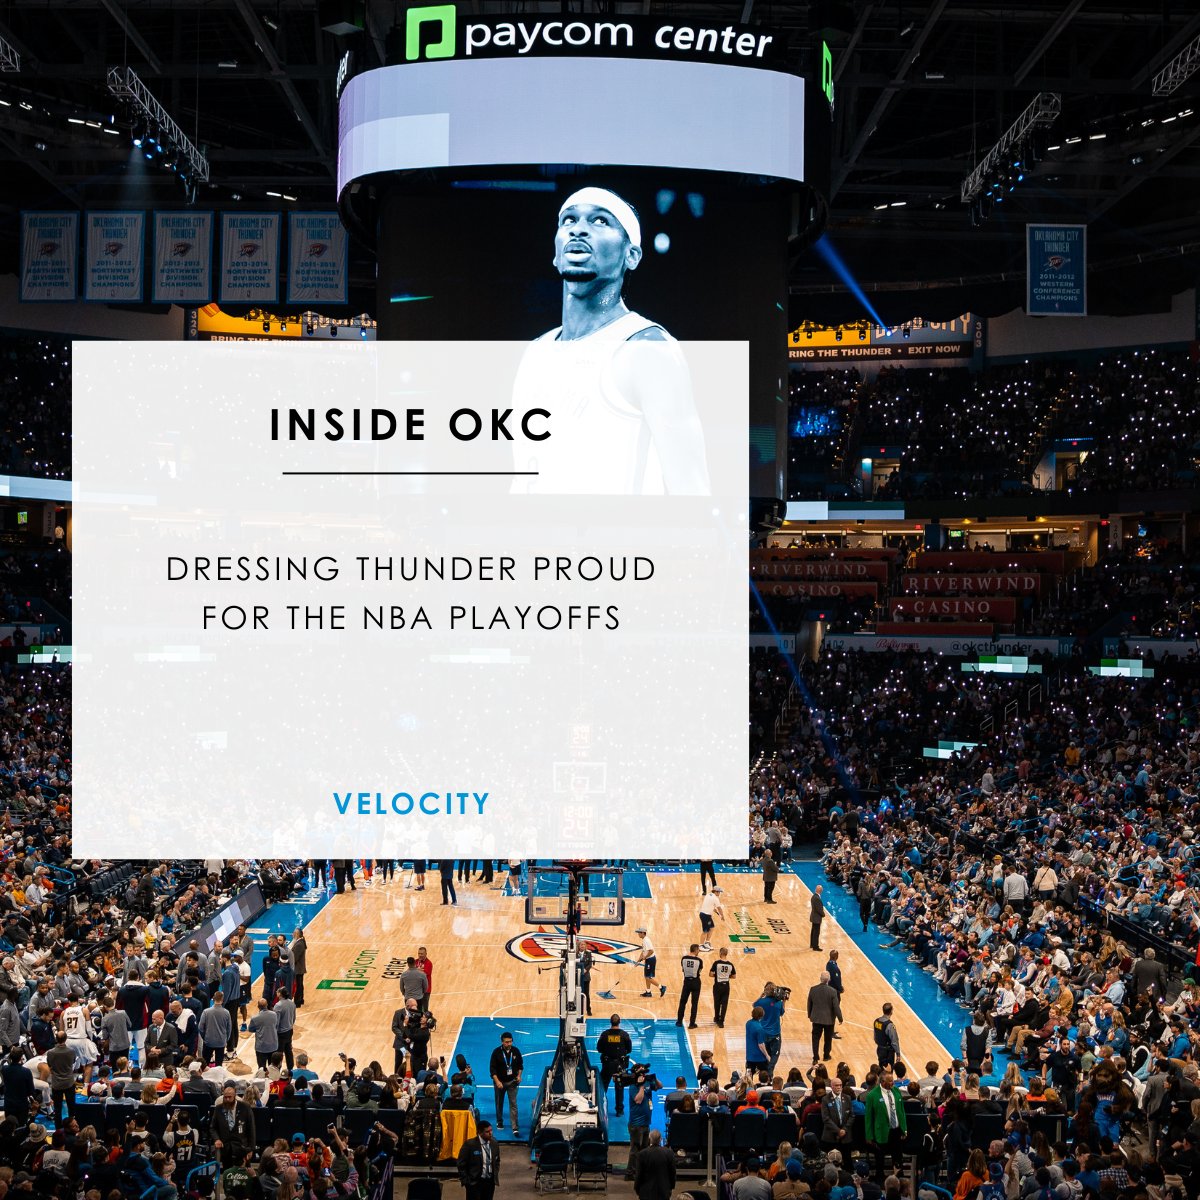 Our OKC Thunder is back in the NBA Playoffs and the first game is this Sunday, April 21 at the Paycom Center. If you’re looking for ways to feel stylish and pulled together while supporting the home team, we’ve got you covered. Check out our ideas: bit.ly/4b25N02